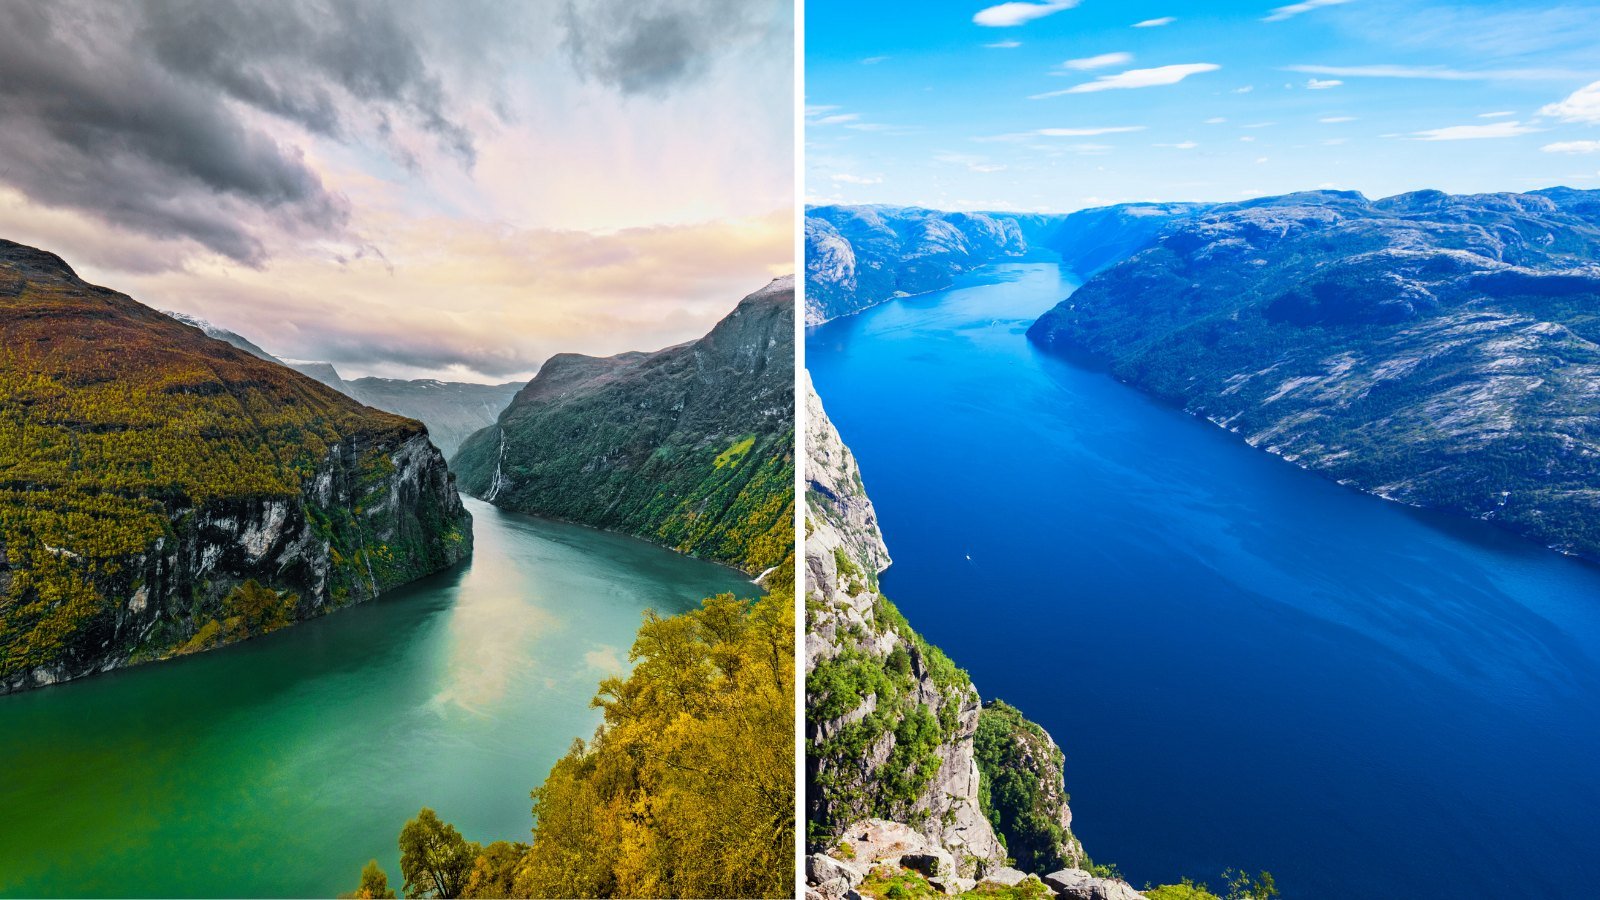 Famous views of the Geirangerfjord and Lysefjord in Norway.